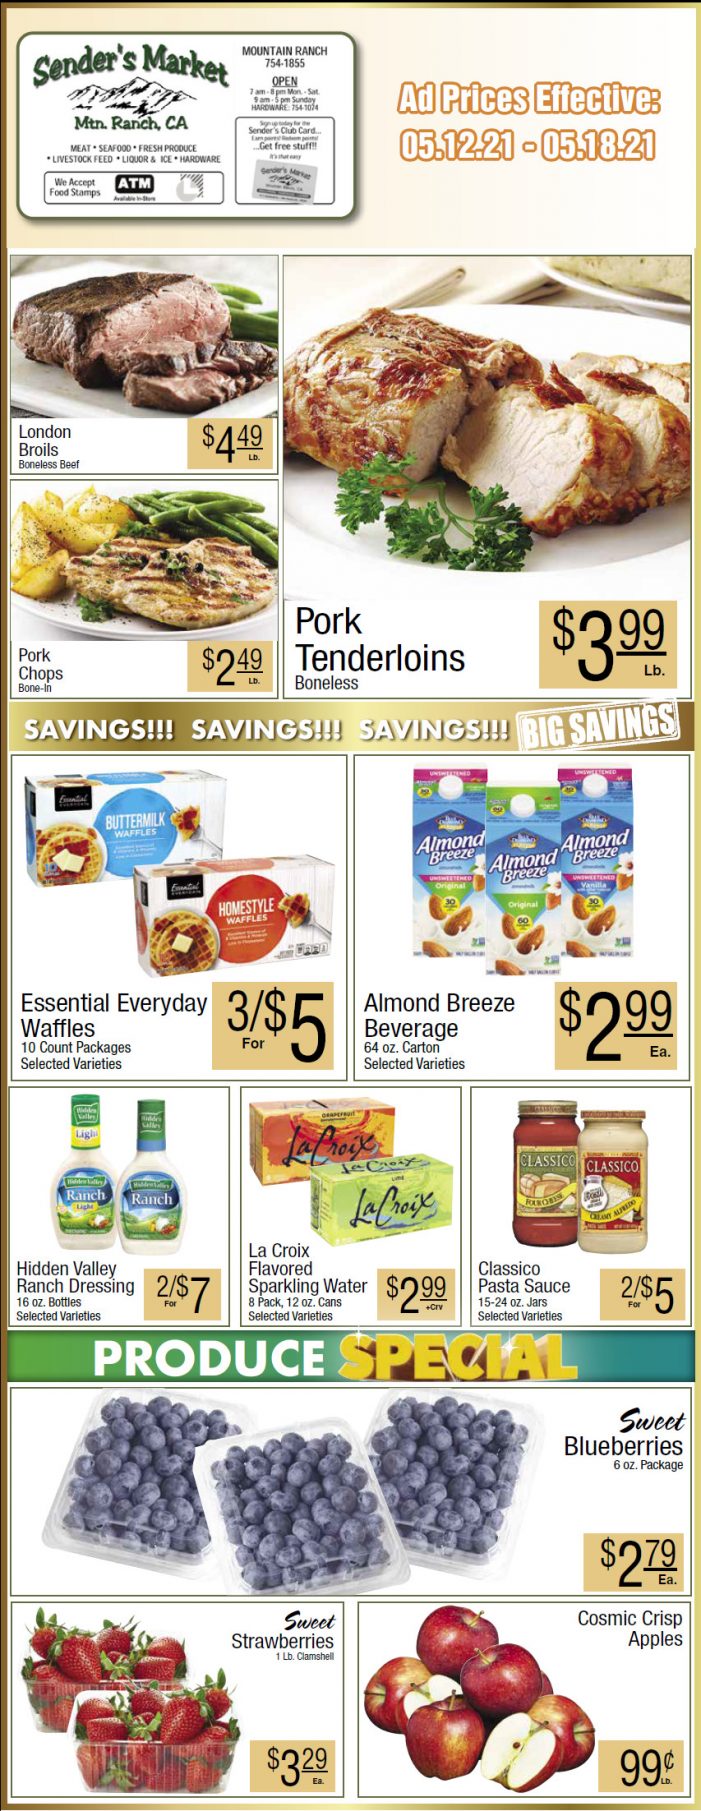 Sender’s Market’s Weekly Ad & Grocery Specials Through May 18th.  Shop Local & Save!